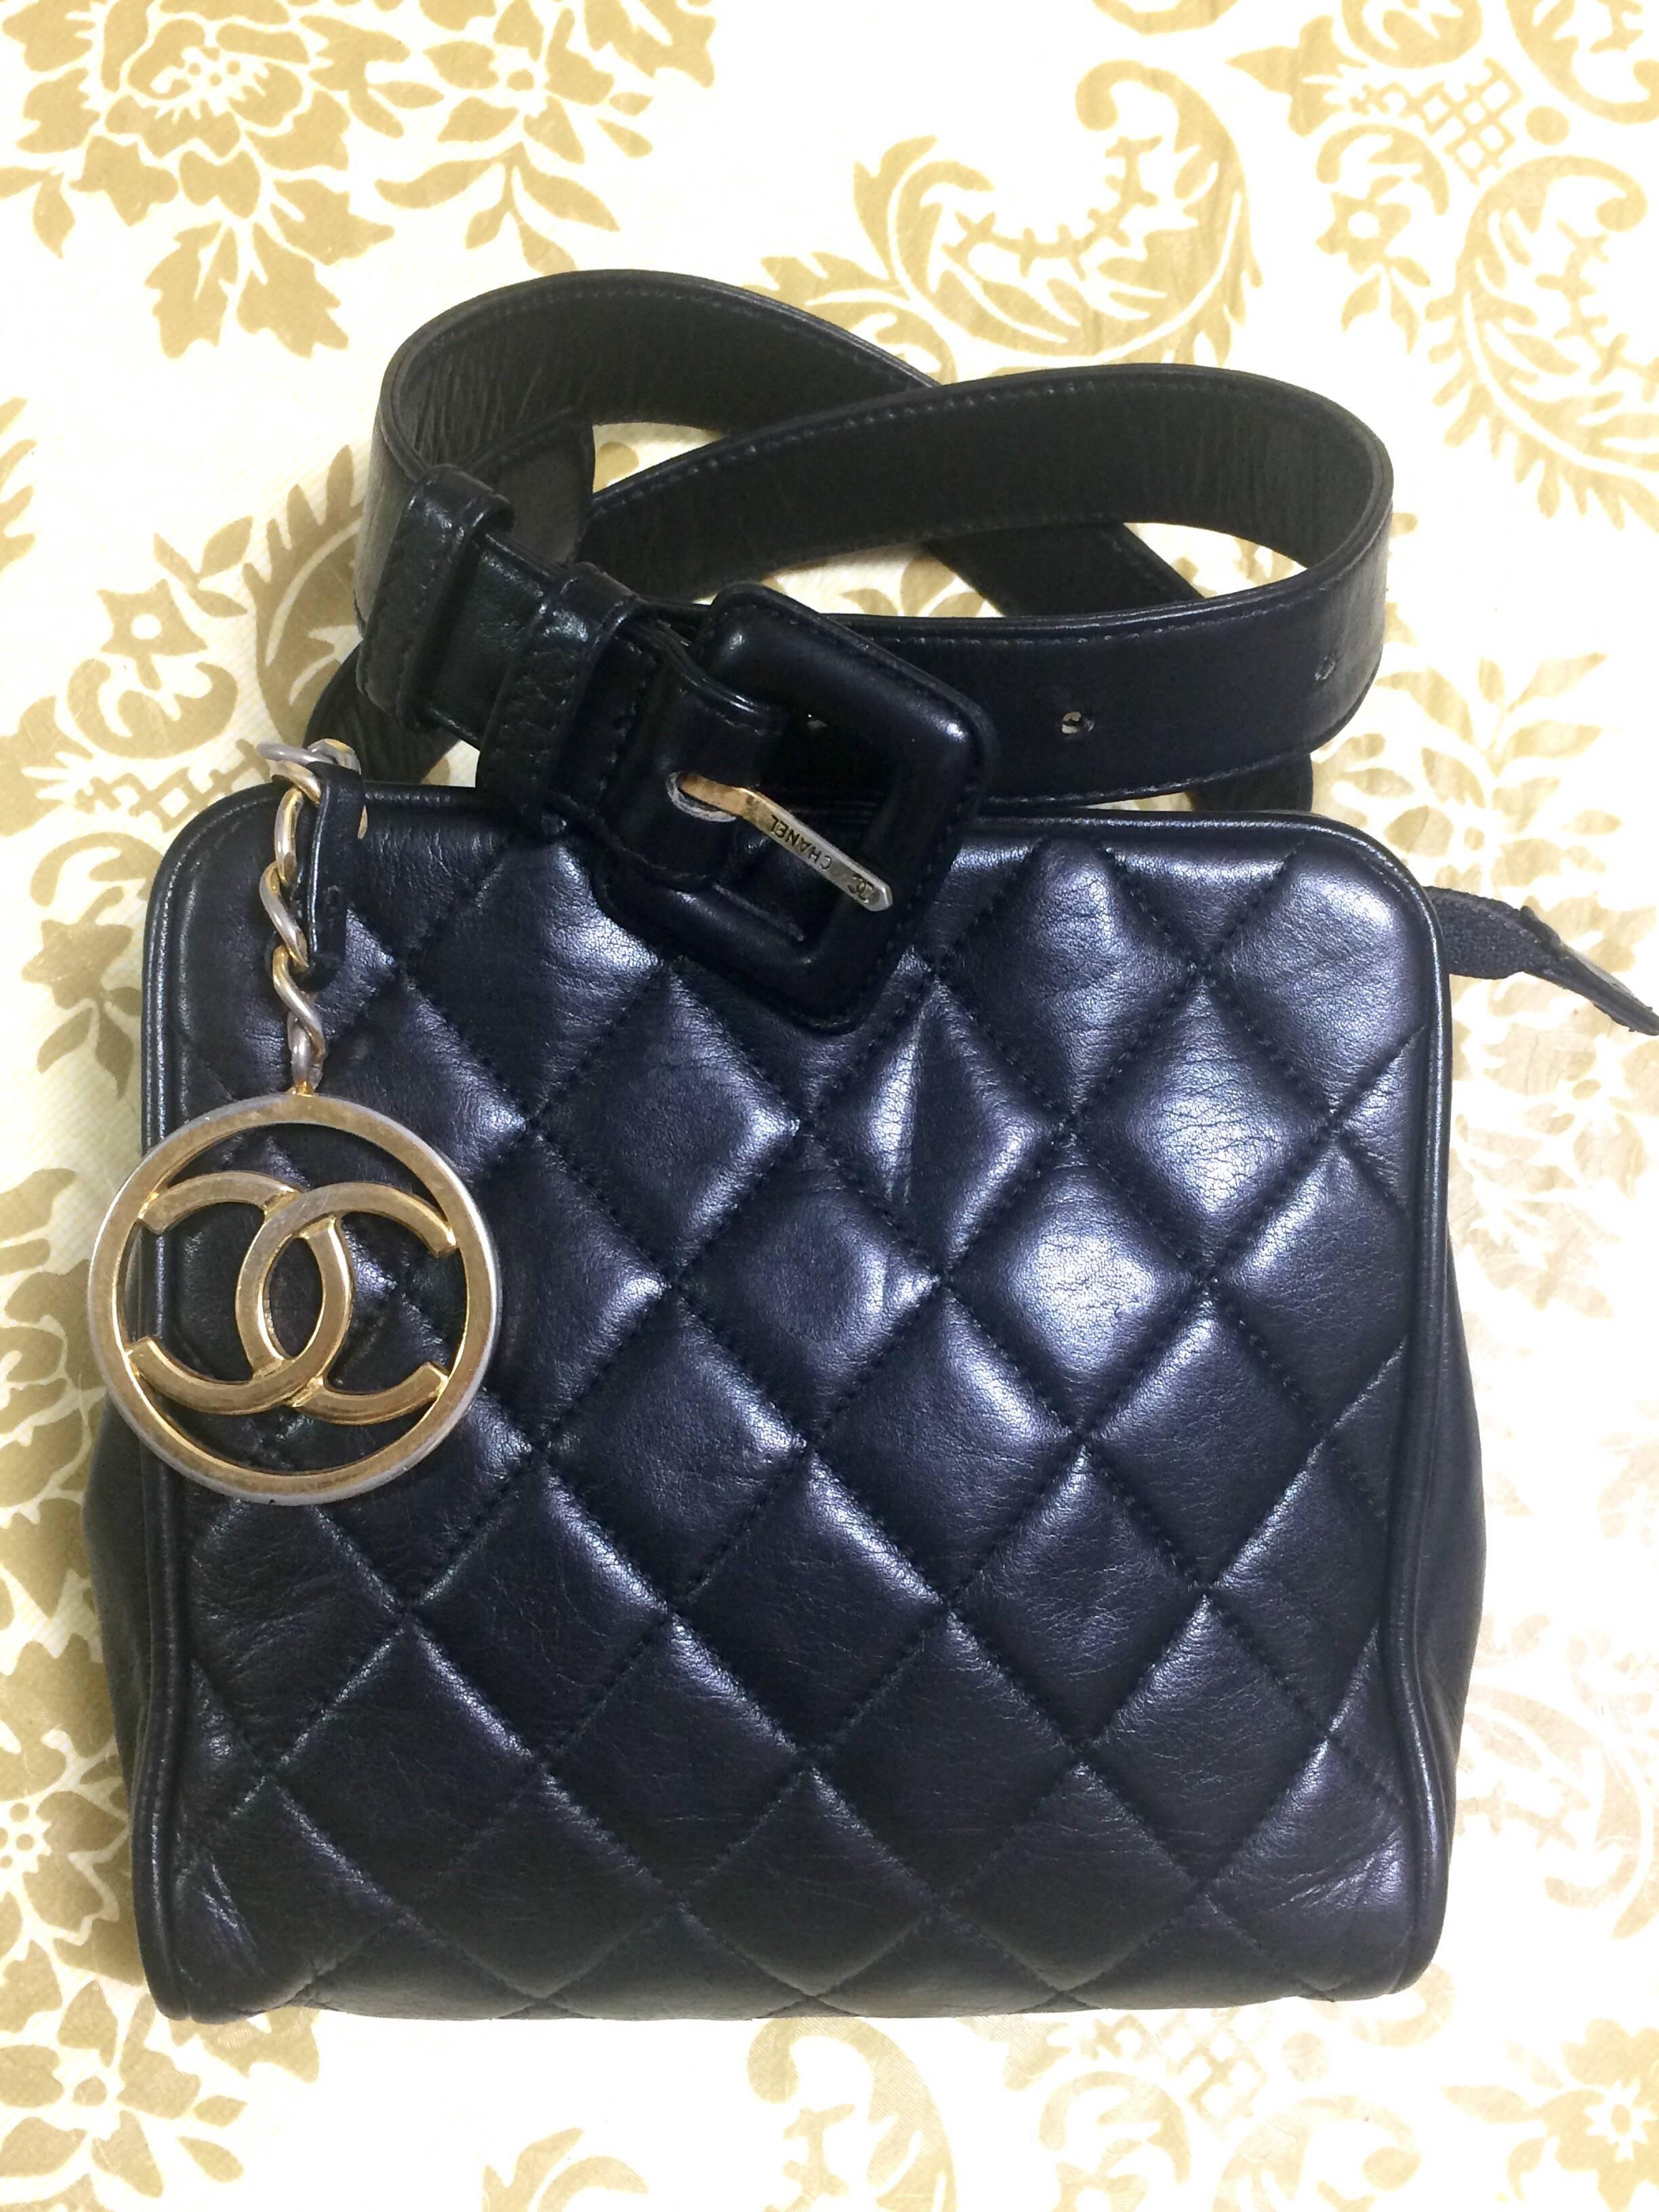 1990s. Vintage CHANEL black lamb leather oval flap waist purse, fanny pack with CC closure hock. 26.5" through 30".(67cm to 76cm)

Vintage CHANEL black leather square shape waist purse, fanny bag with a matching belt and CC dangling